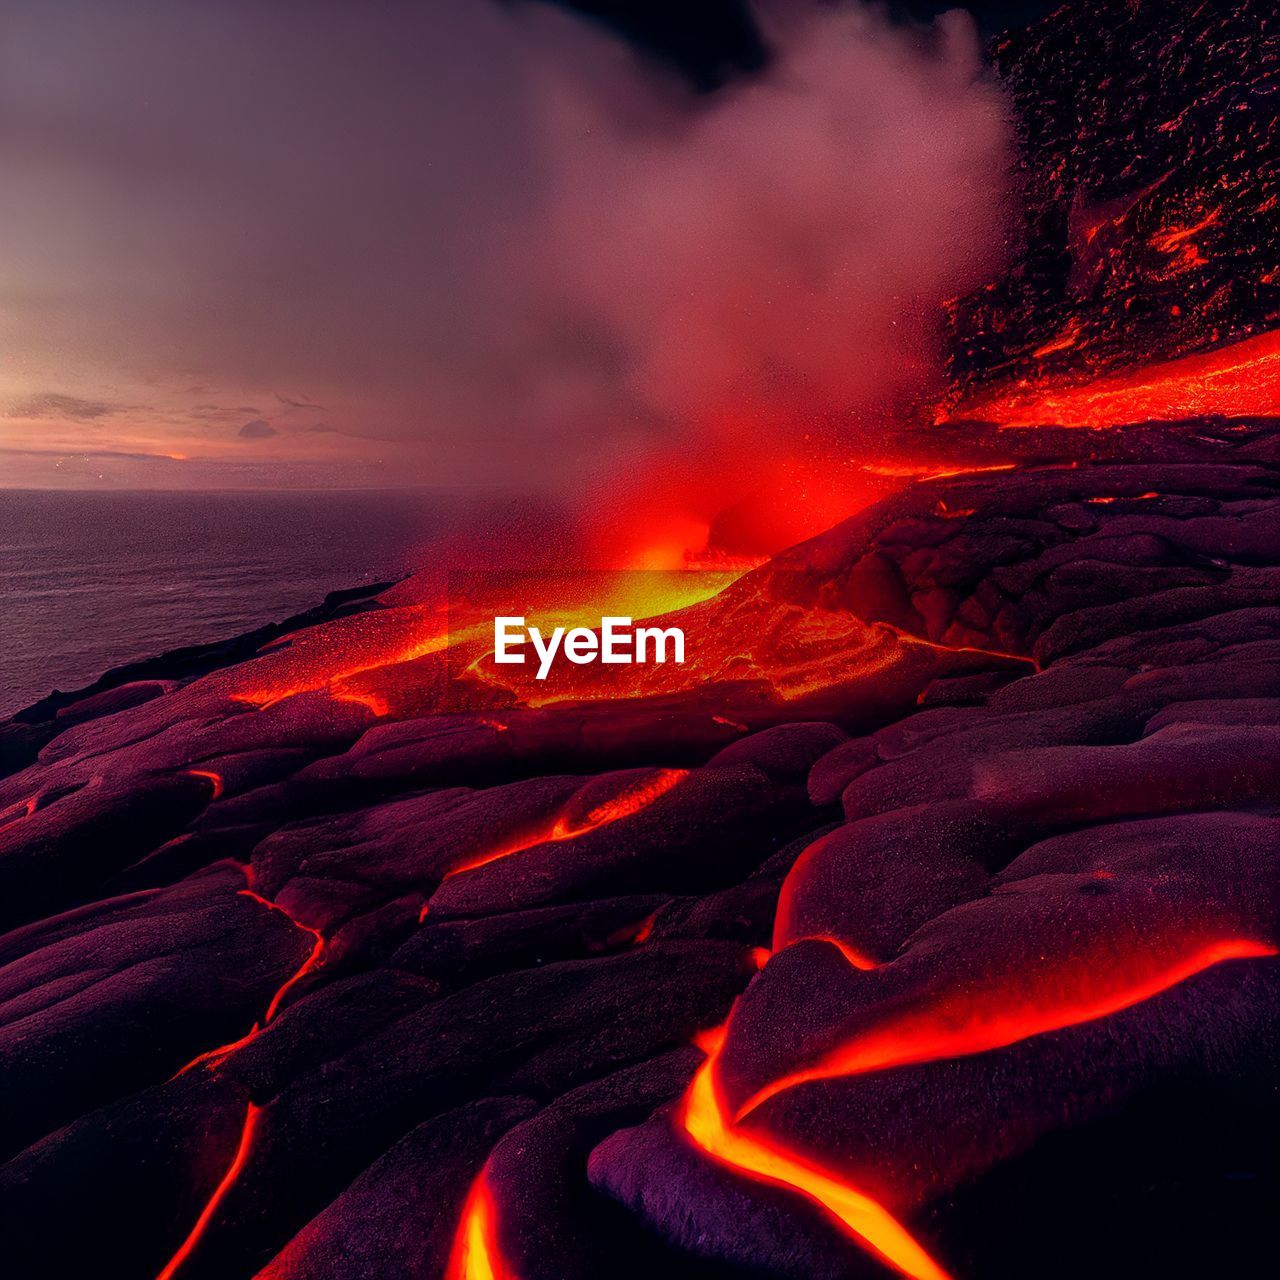 lava, volcano, geology, power in nature, beauty in nature, land, heat, landscape, nature, erupting, environment, mountain, no people, island, water, red, night, active volcano, scenics - nature, outdoors, glowing, non-urban scene, natural phenomenon, motion, flowing, volcanic landscape, travel destinations, sea, molten, sky, accidents and disasters, physical geography, sign, smoke, communication